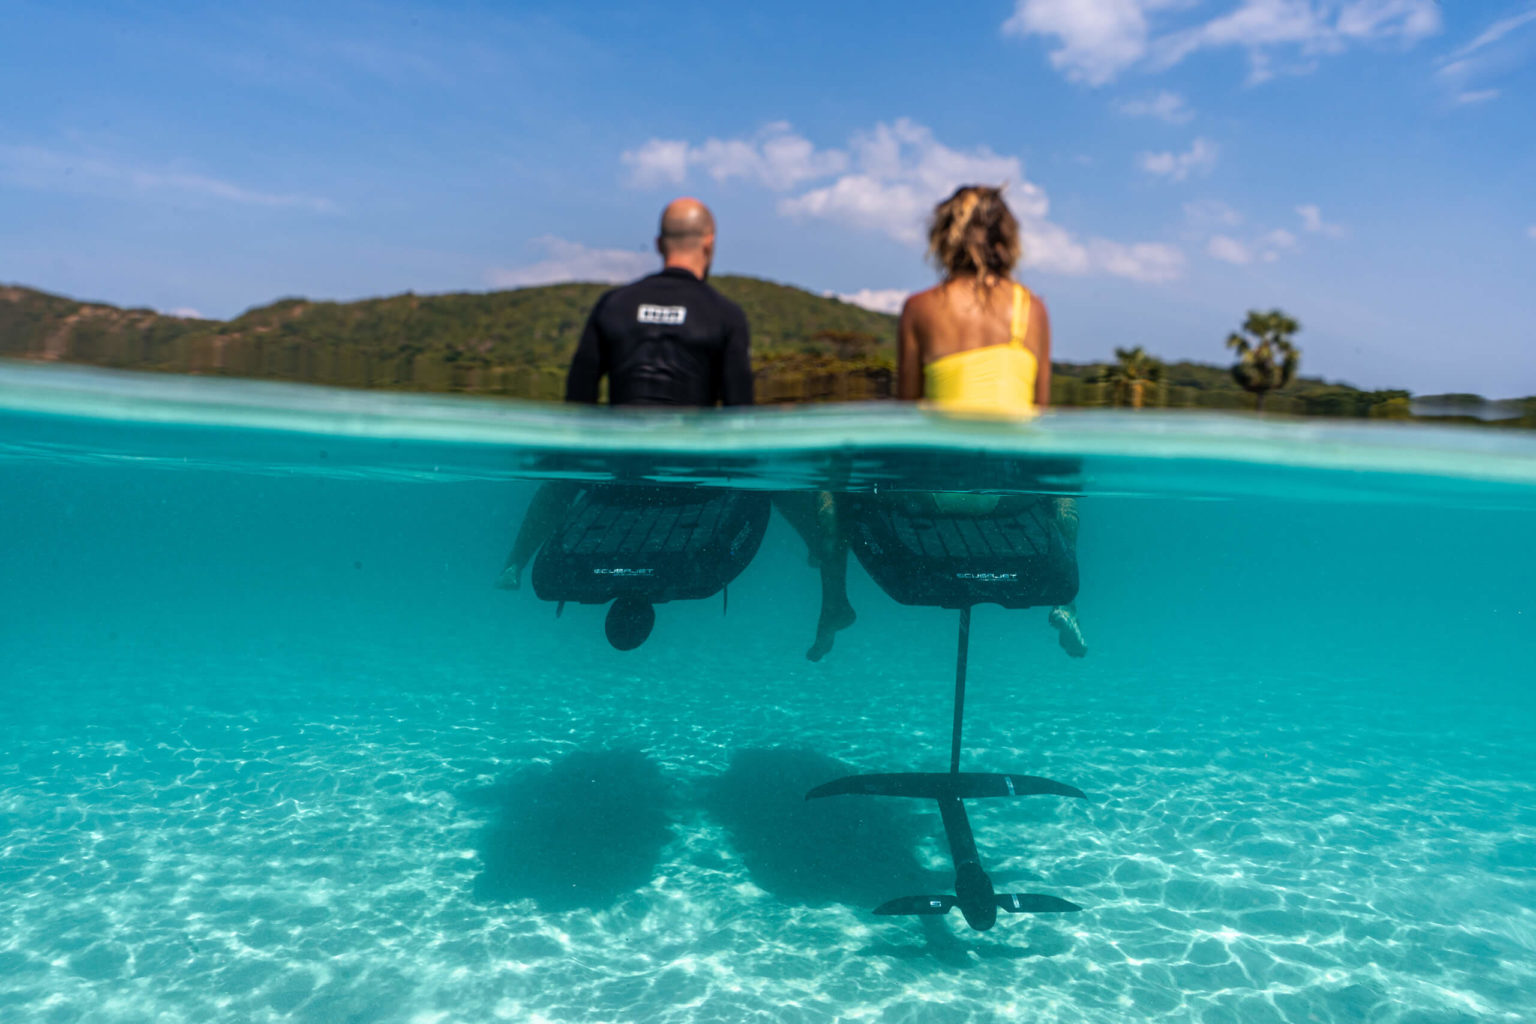 SCUBAJET announces a new Performance Series and unveils revolutionary Hybridboard